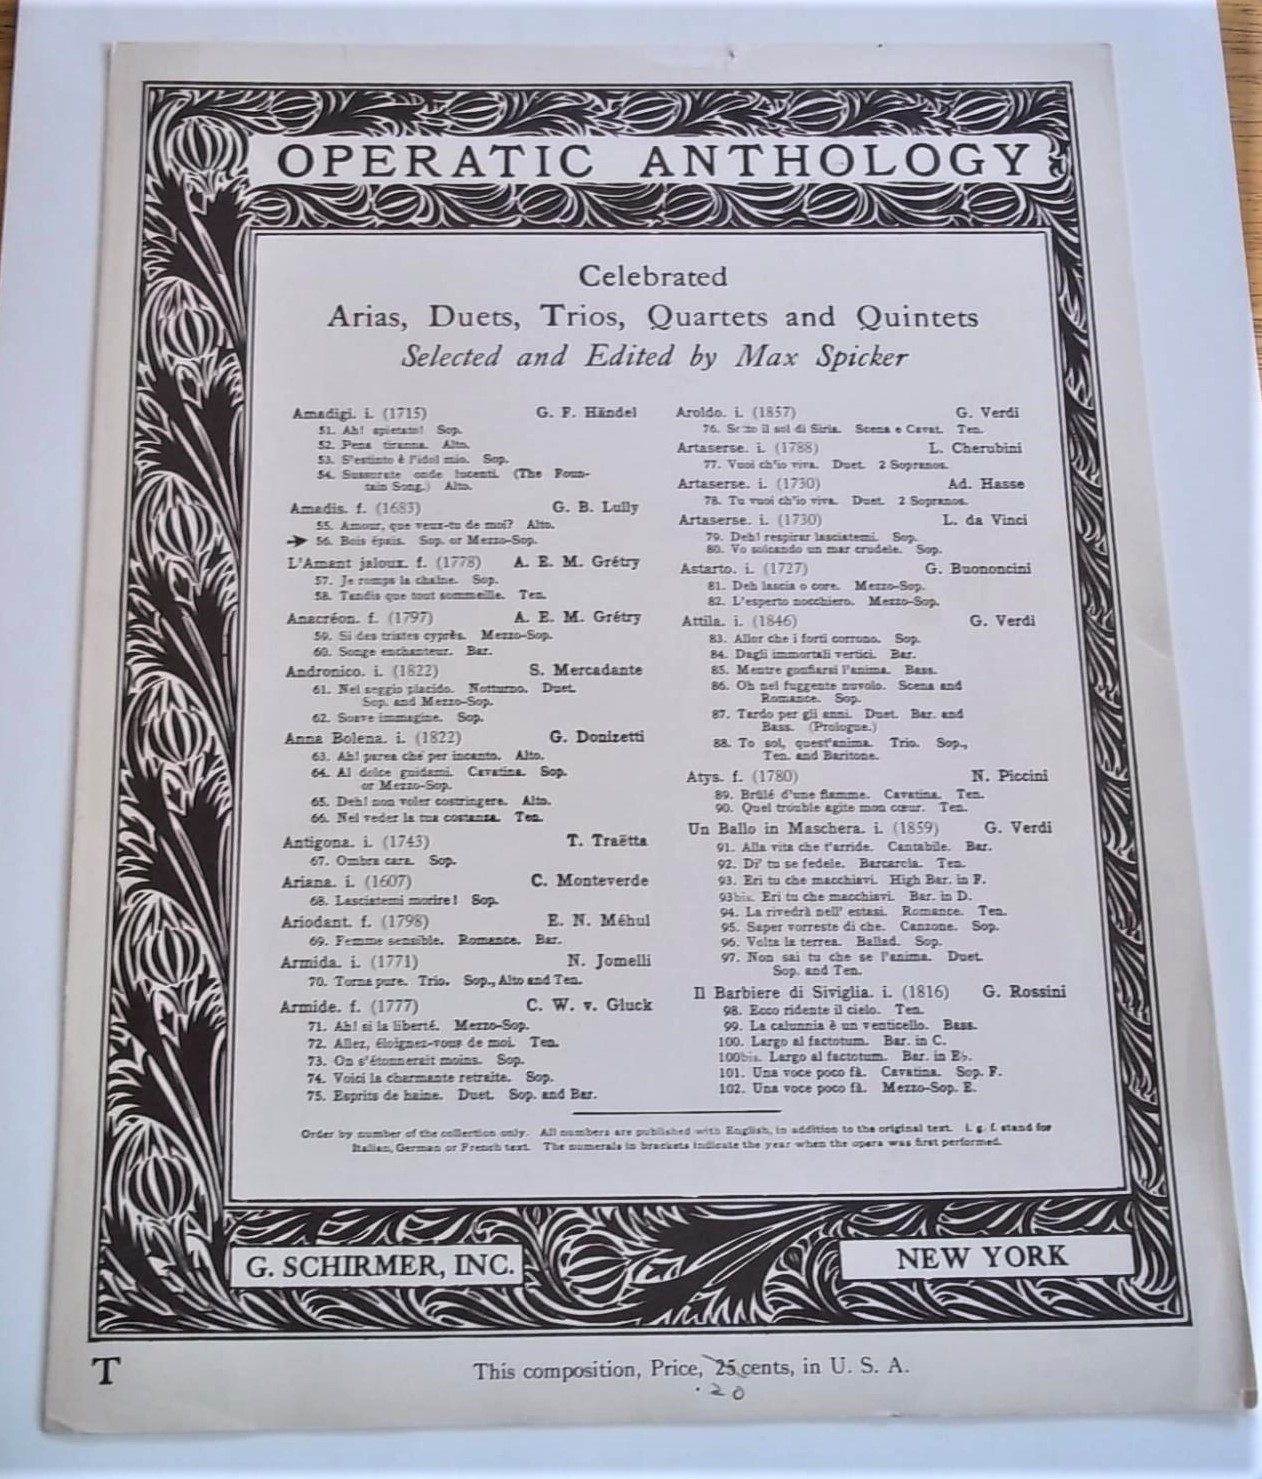 Amadis: Bois Epais, Redouble Ton Ombre, Aria (Soprano or Mezzo-Soprano) (Sheet Music) by G. B. (Jean-Baptiste De Giovanni Lulli) (Composer) and Dr. Theodore Baker (English Version By): (1894) Later